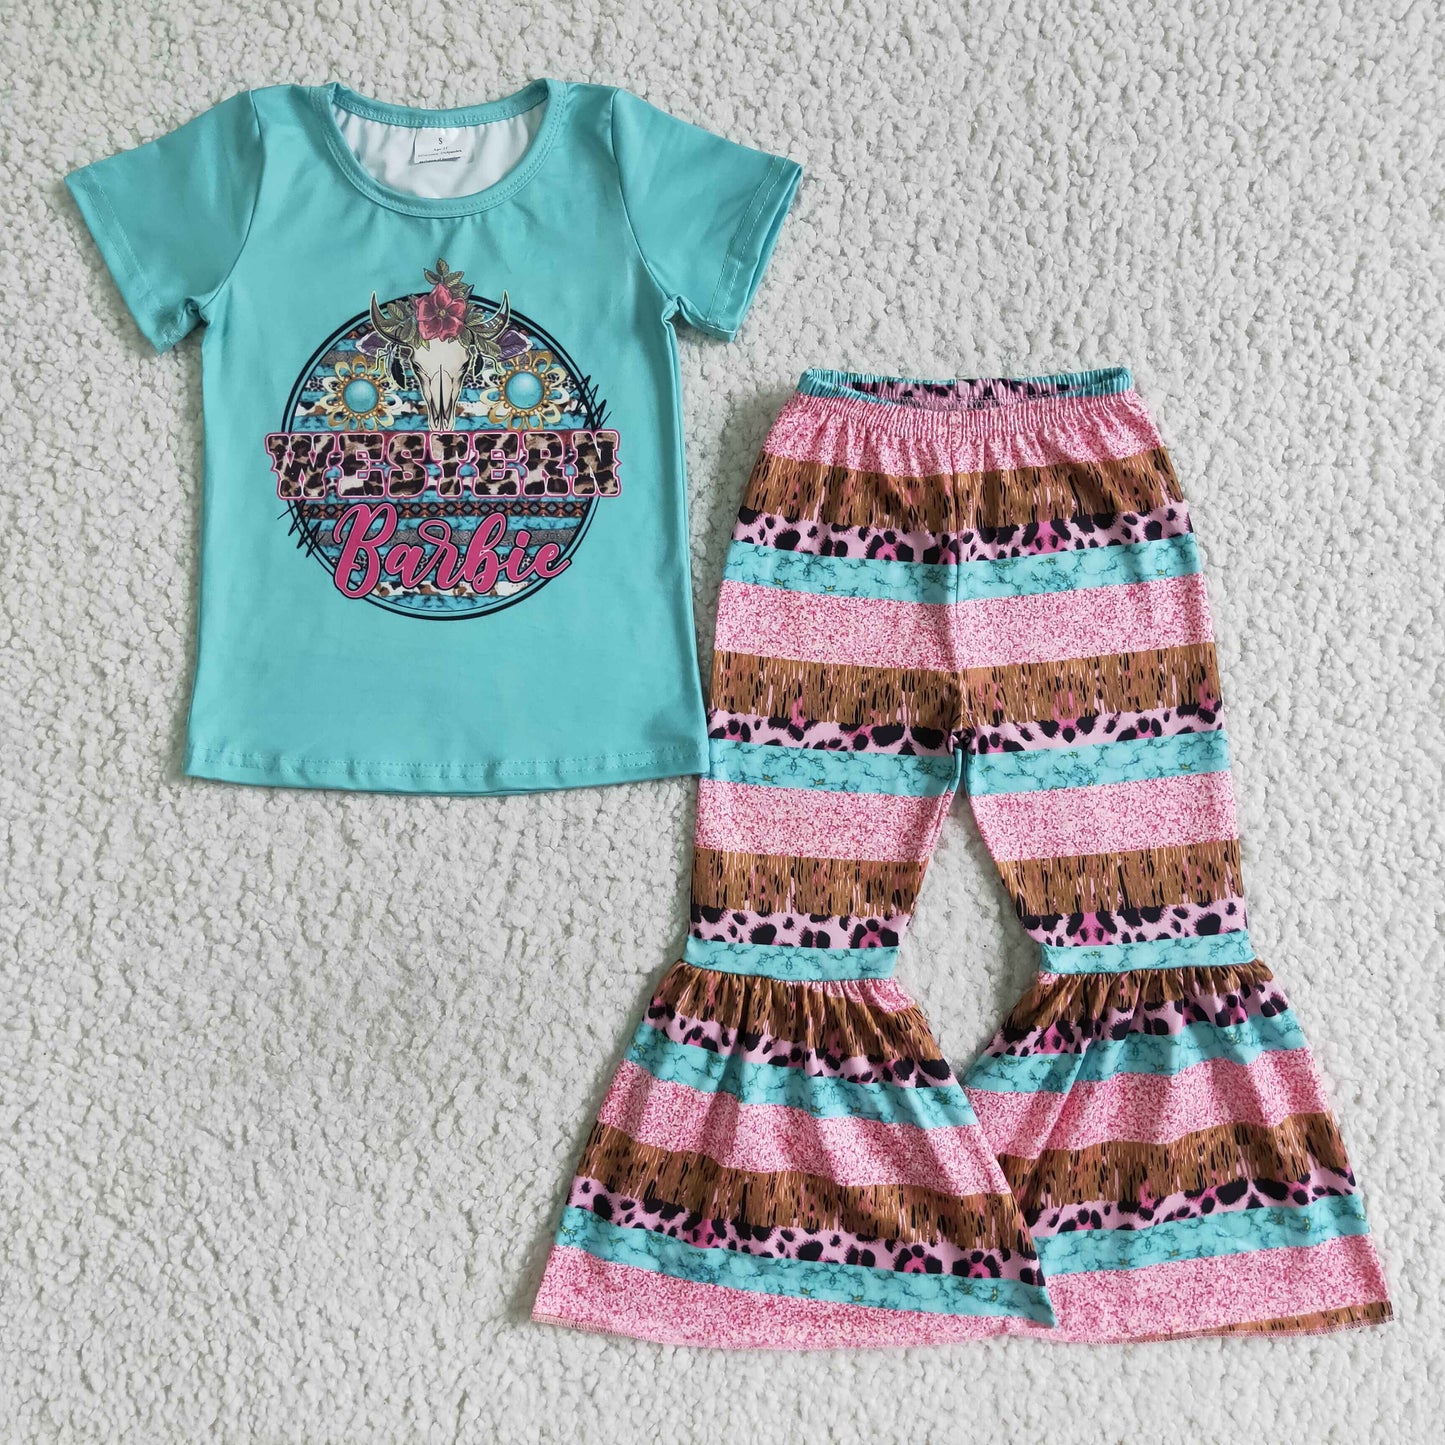 Go party shirt match bell bottom pants girls western outfits